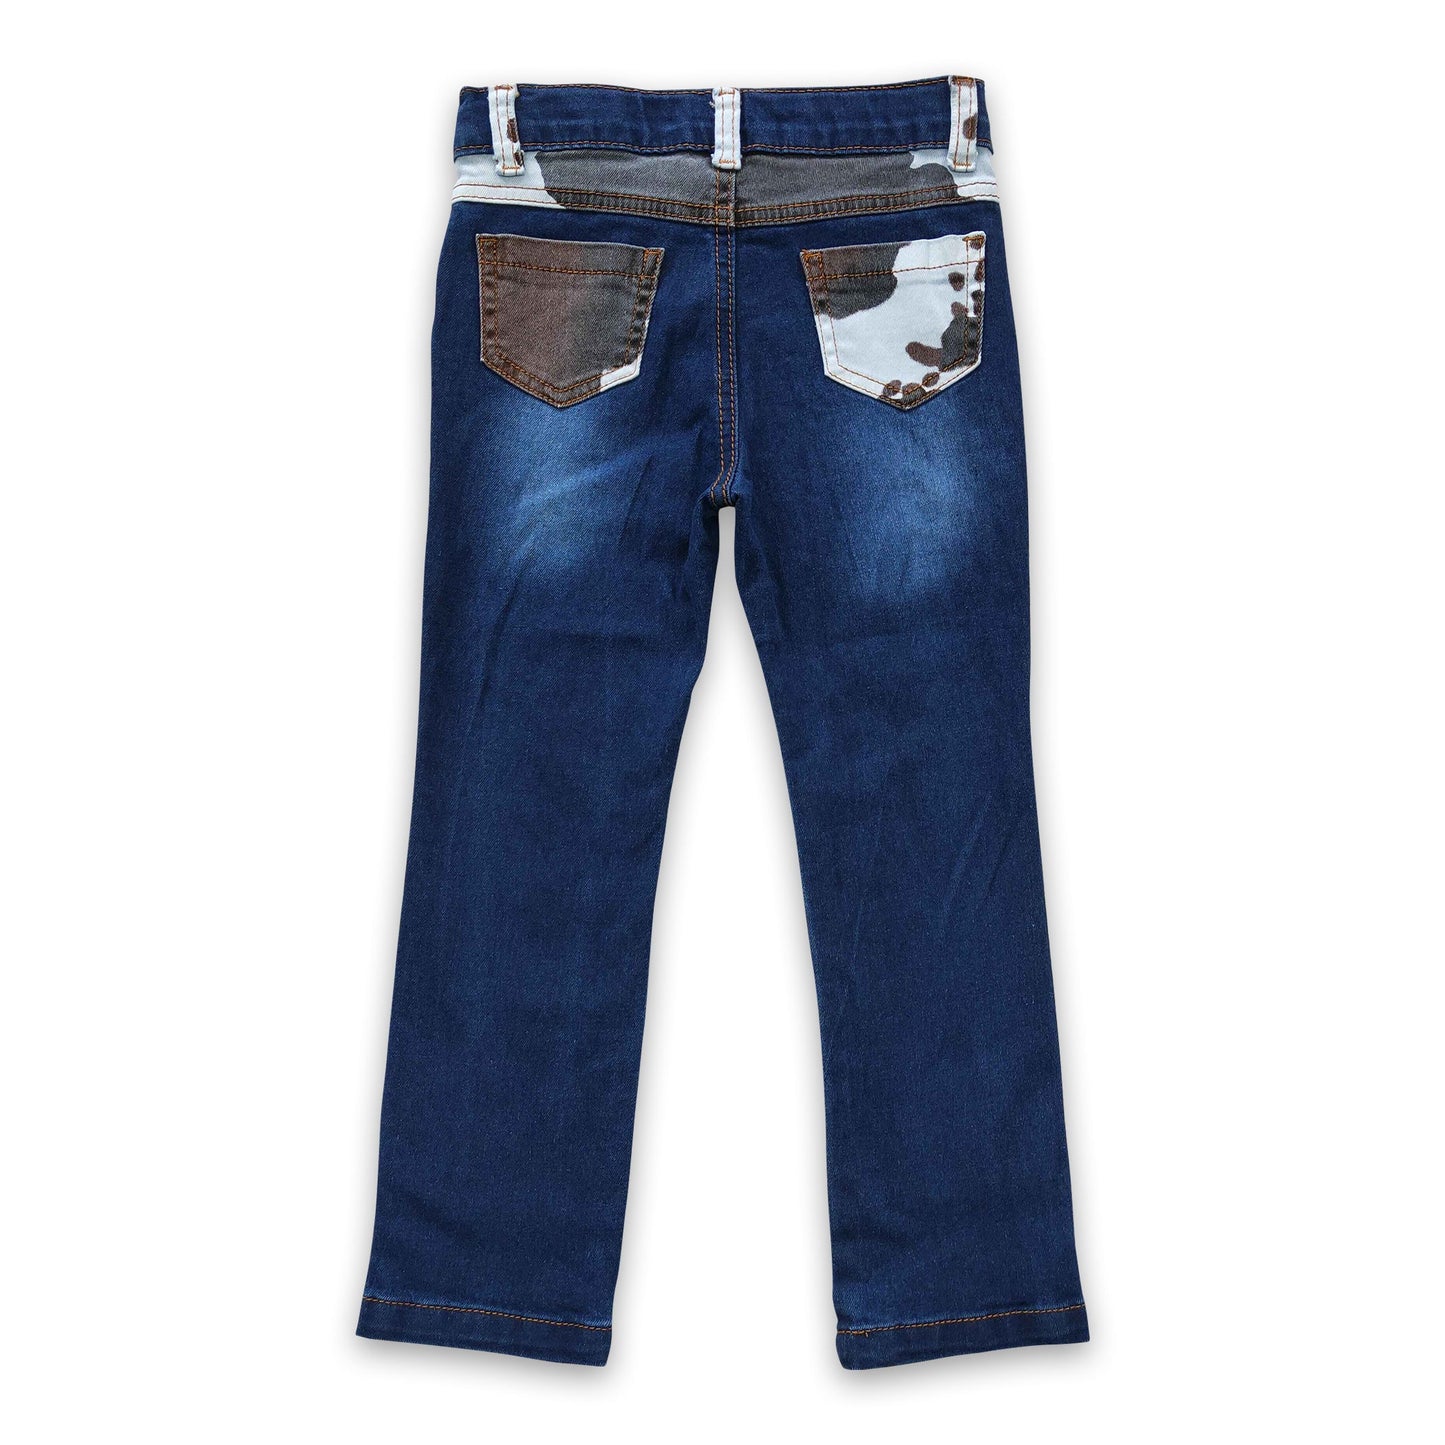 Cow print pockets denim pants washed baby kids jeans